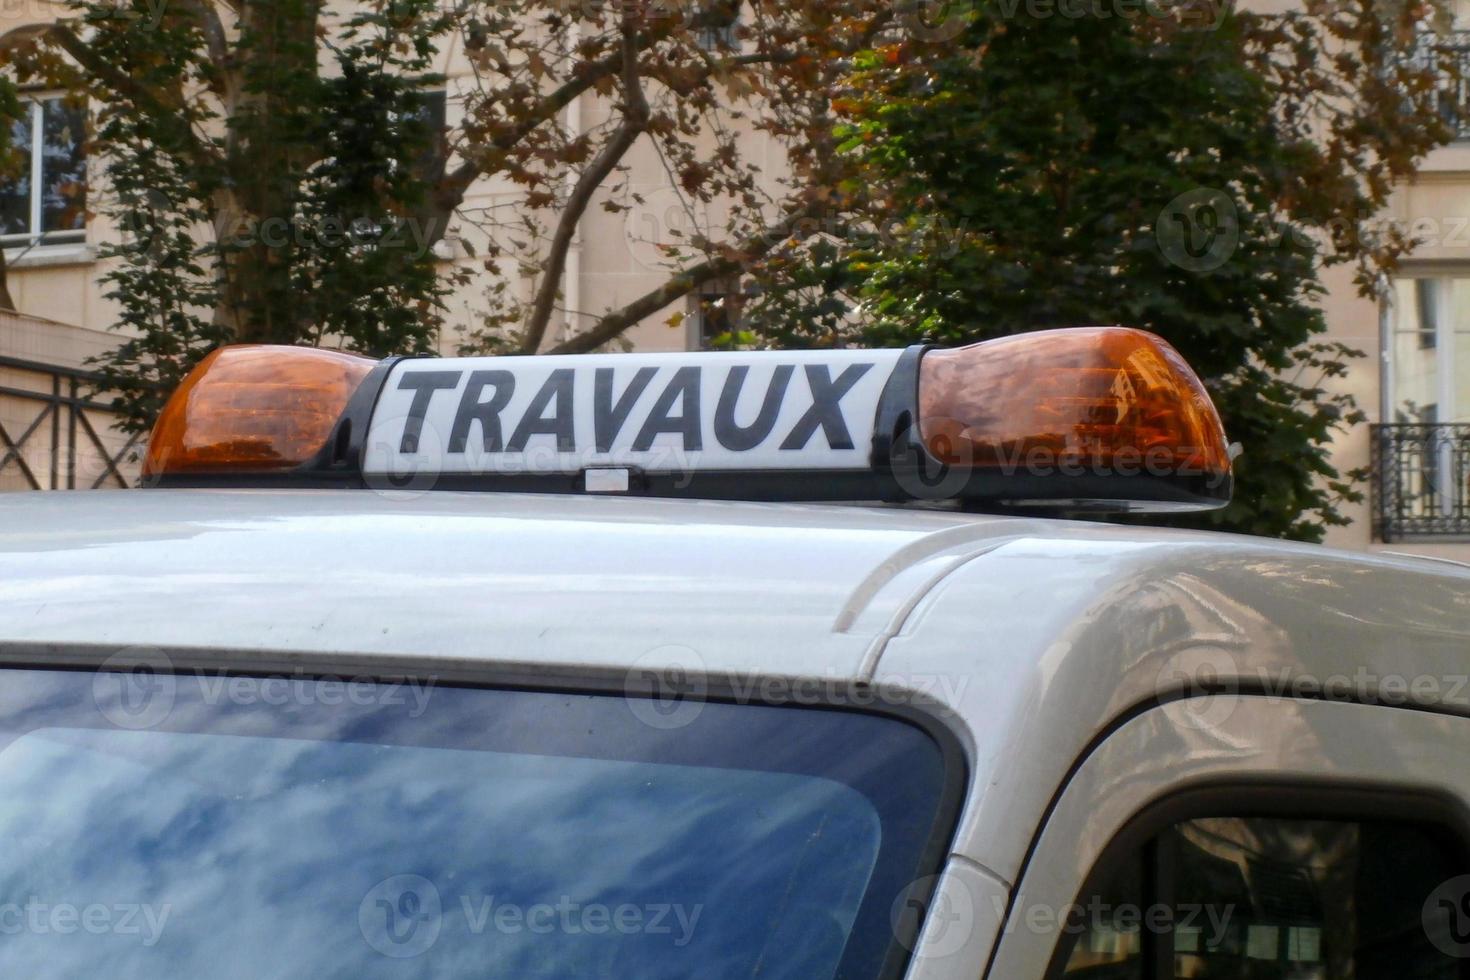 Travaux - Roof-top car sign photo